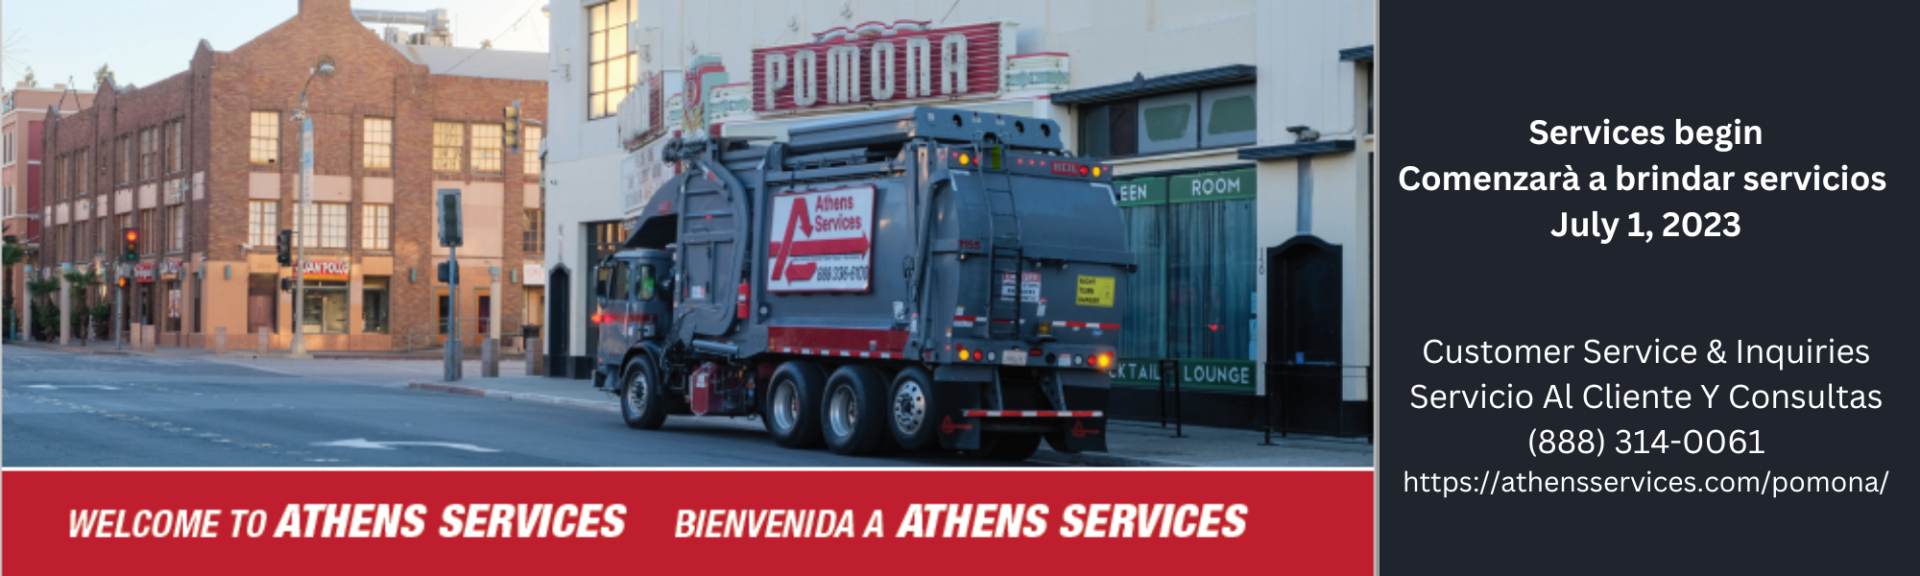 Athens Services Welcome